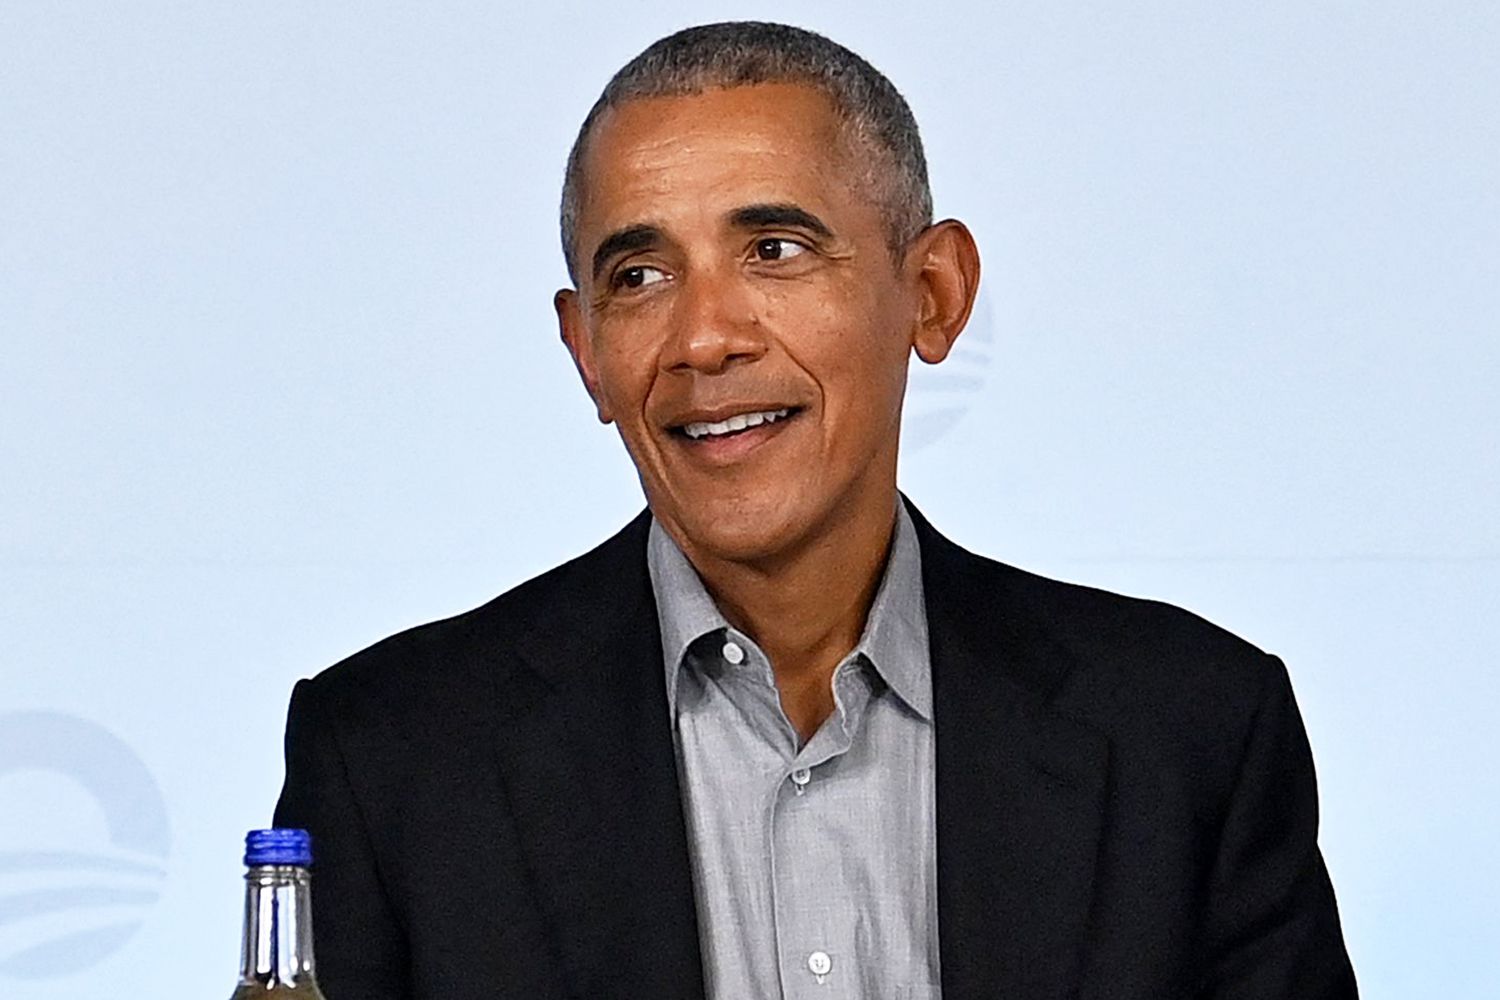 Barack Obama Reveals He Tested Positive for COVID-19: 'Grateful to Be Vaccinated and Boosted'